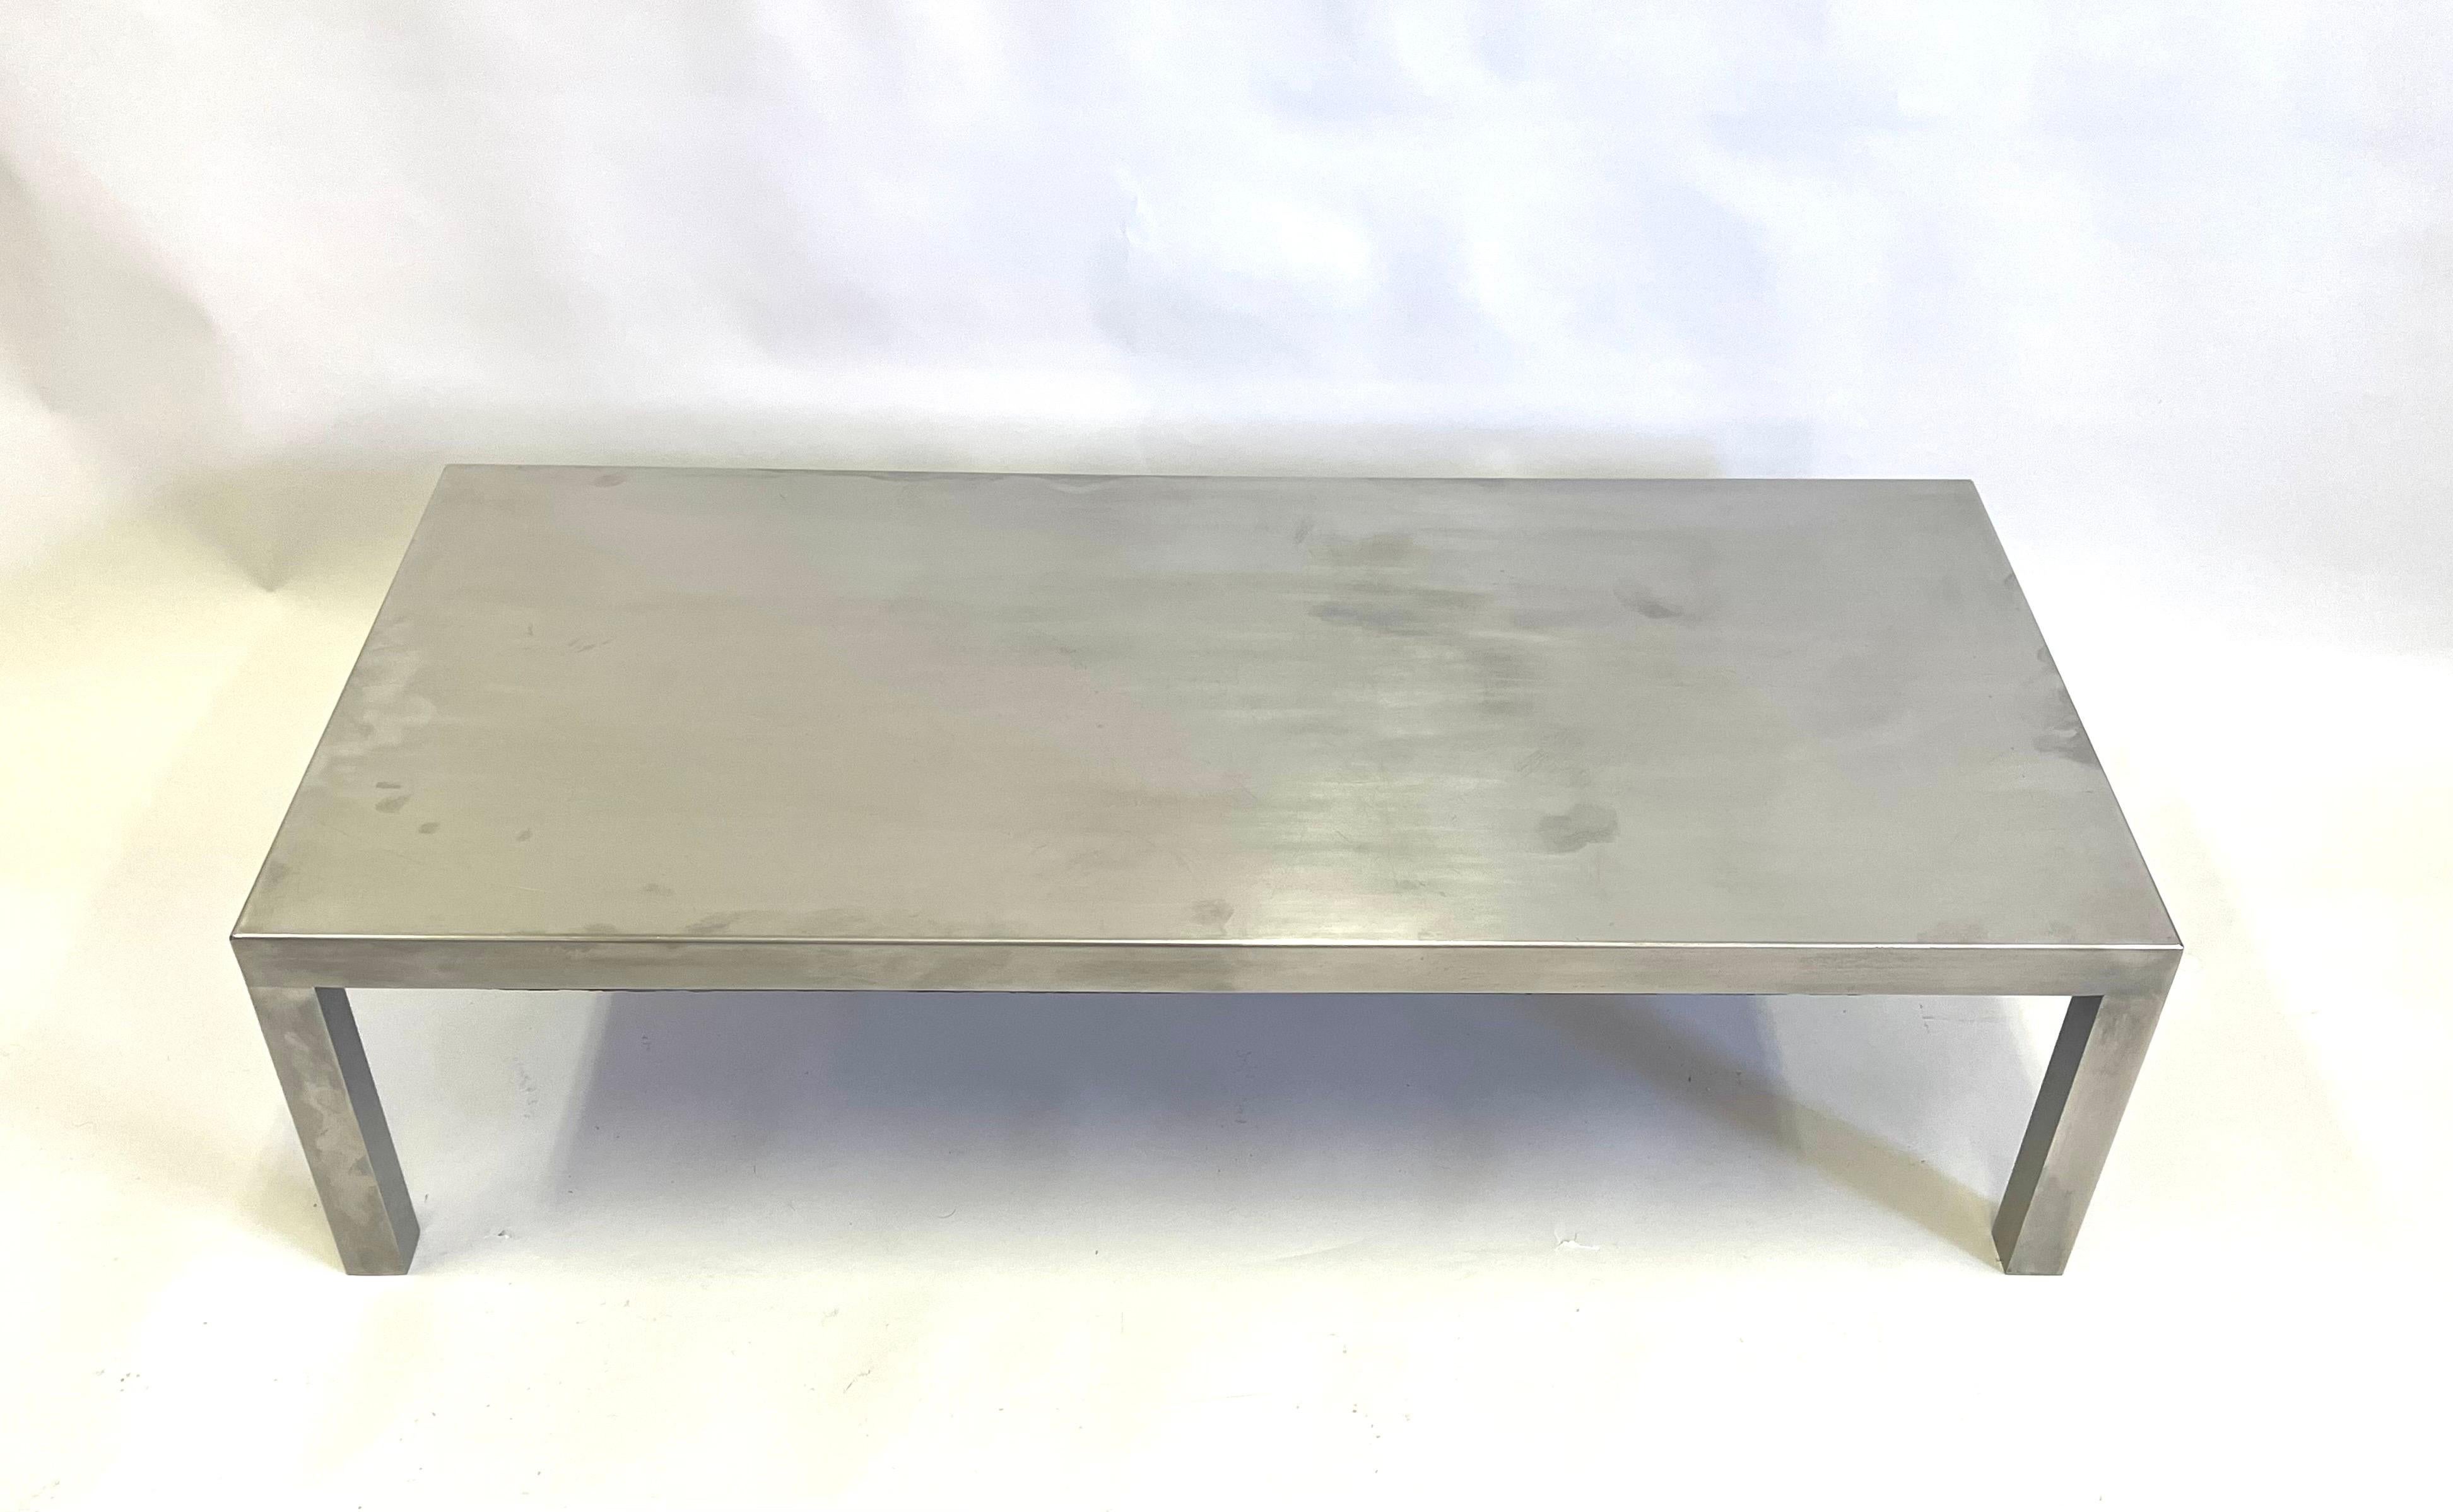 Polished French Mid-Century Modern Matte Stainless Steel Coffee Table, Maria Pergay, 1971 For Sale